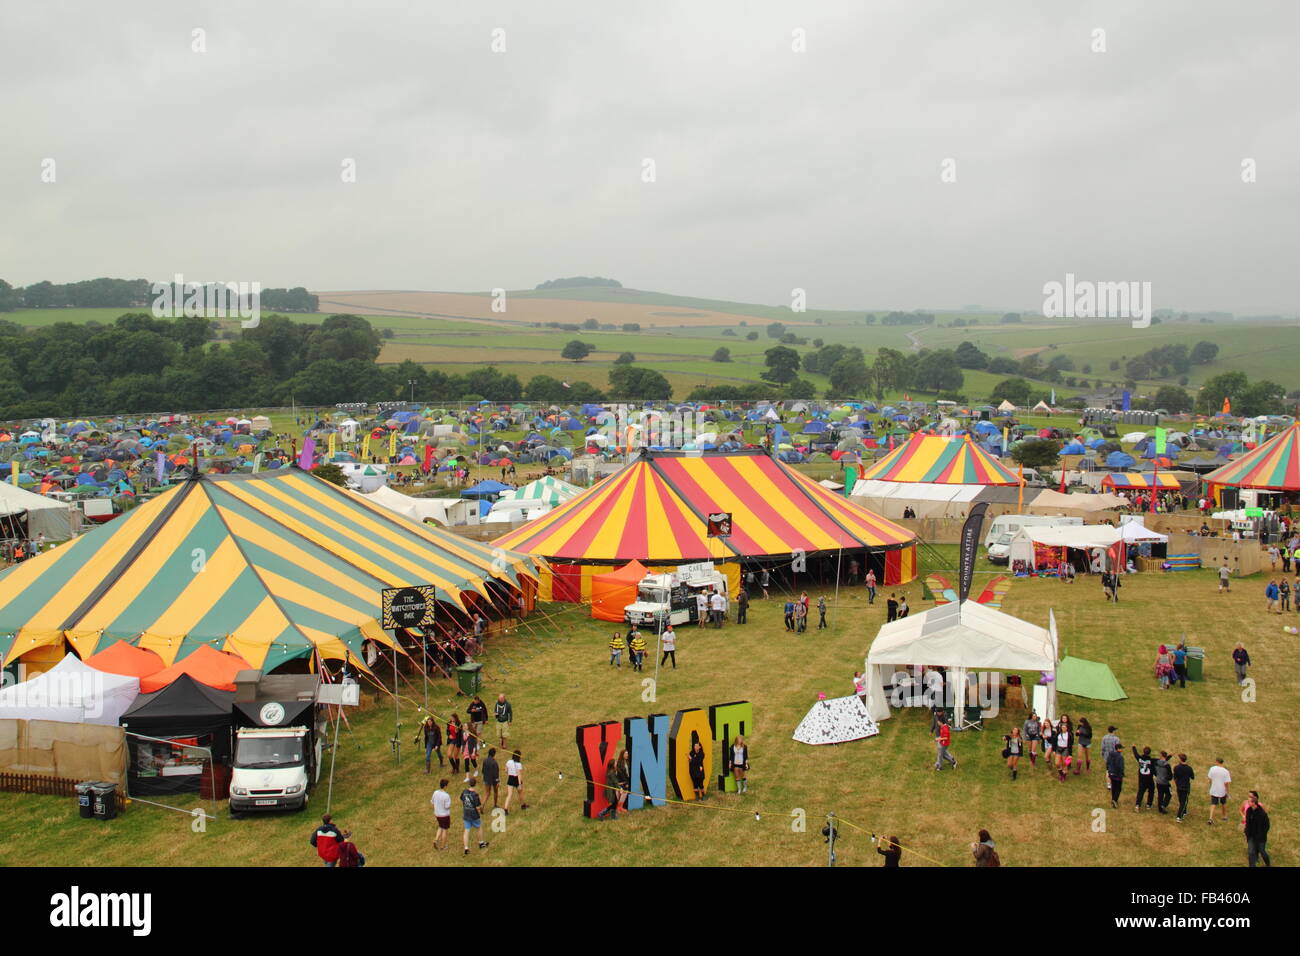 The Y Not music festival underway in the heart of Derbyshire's PEak District National PArk, England - summer Stock Photo